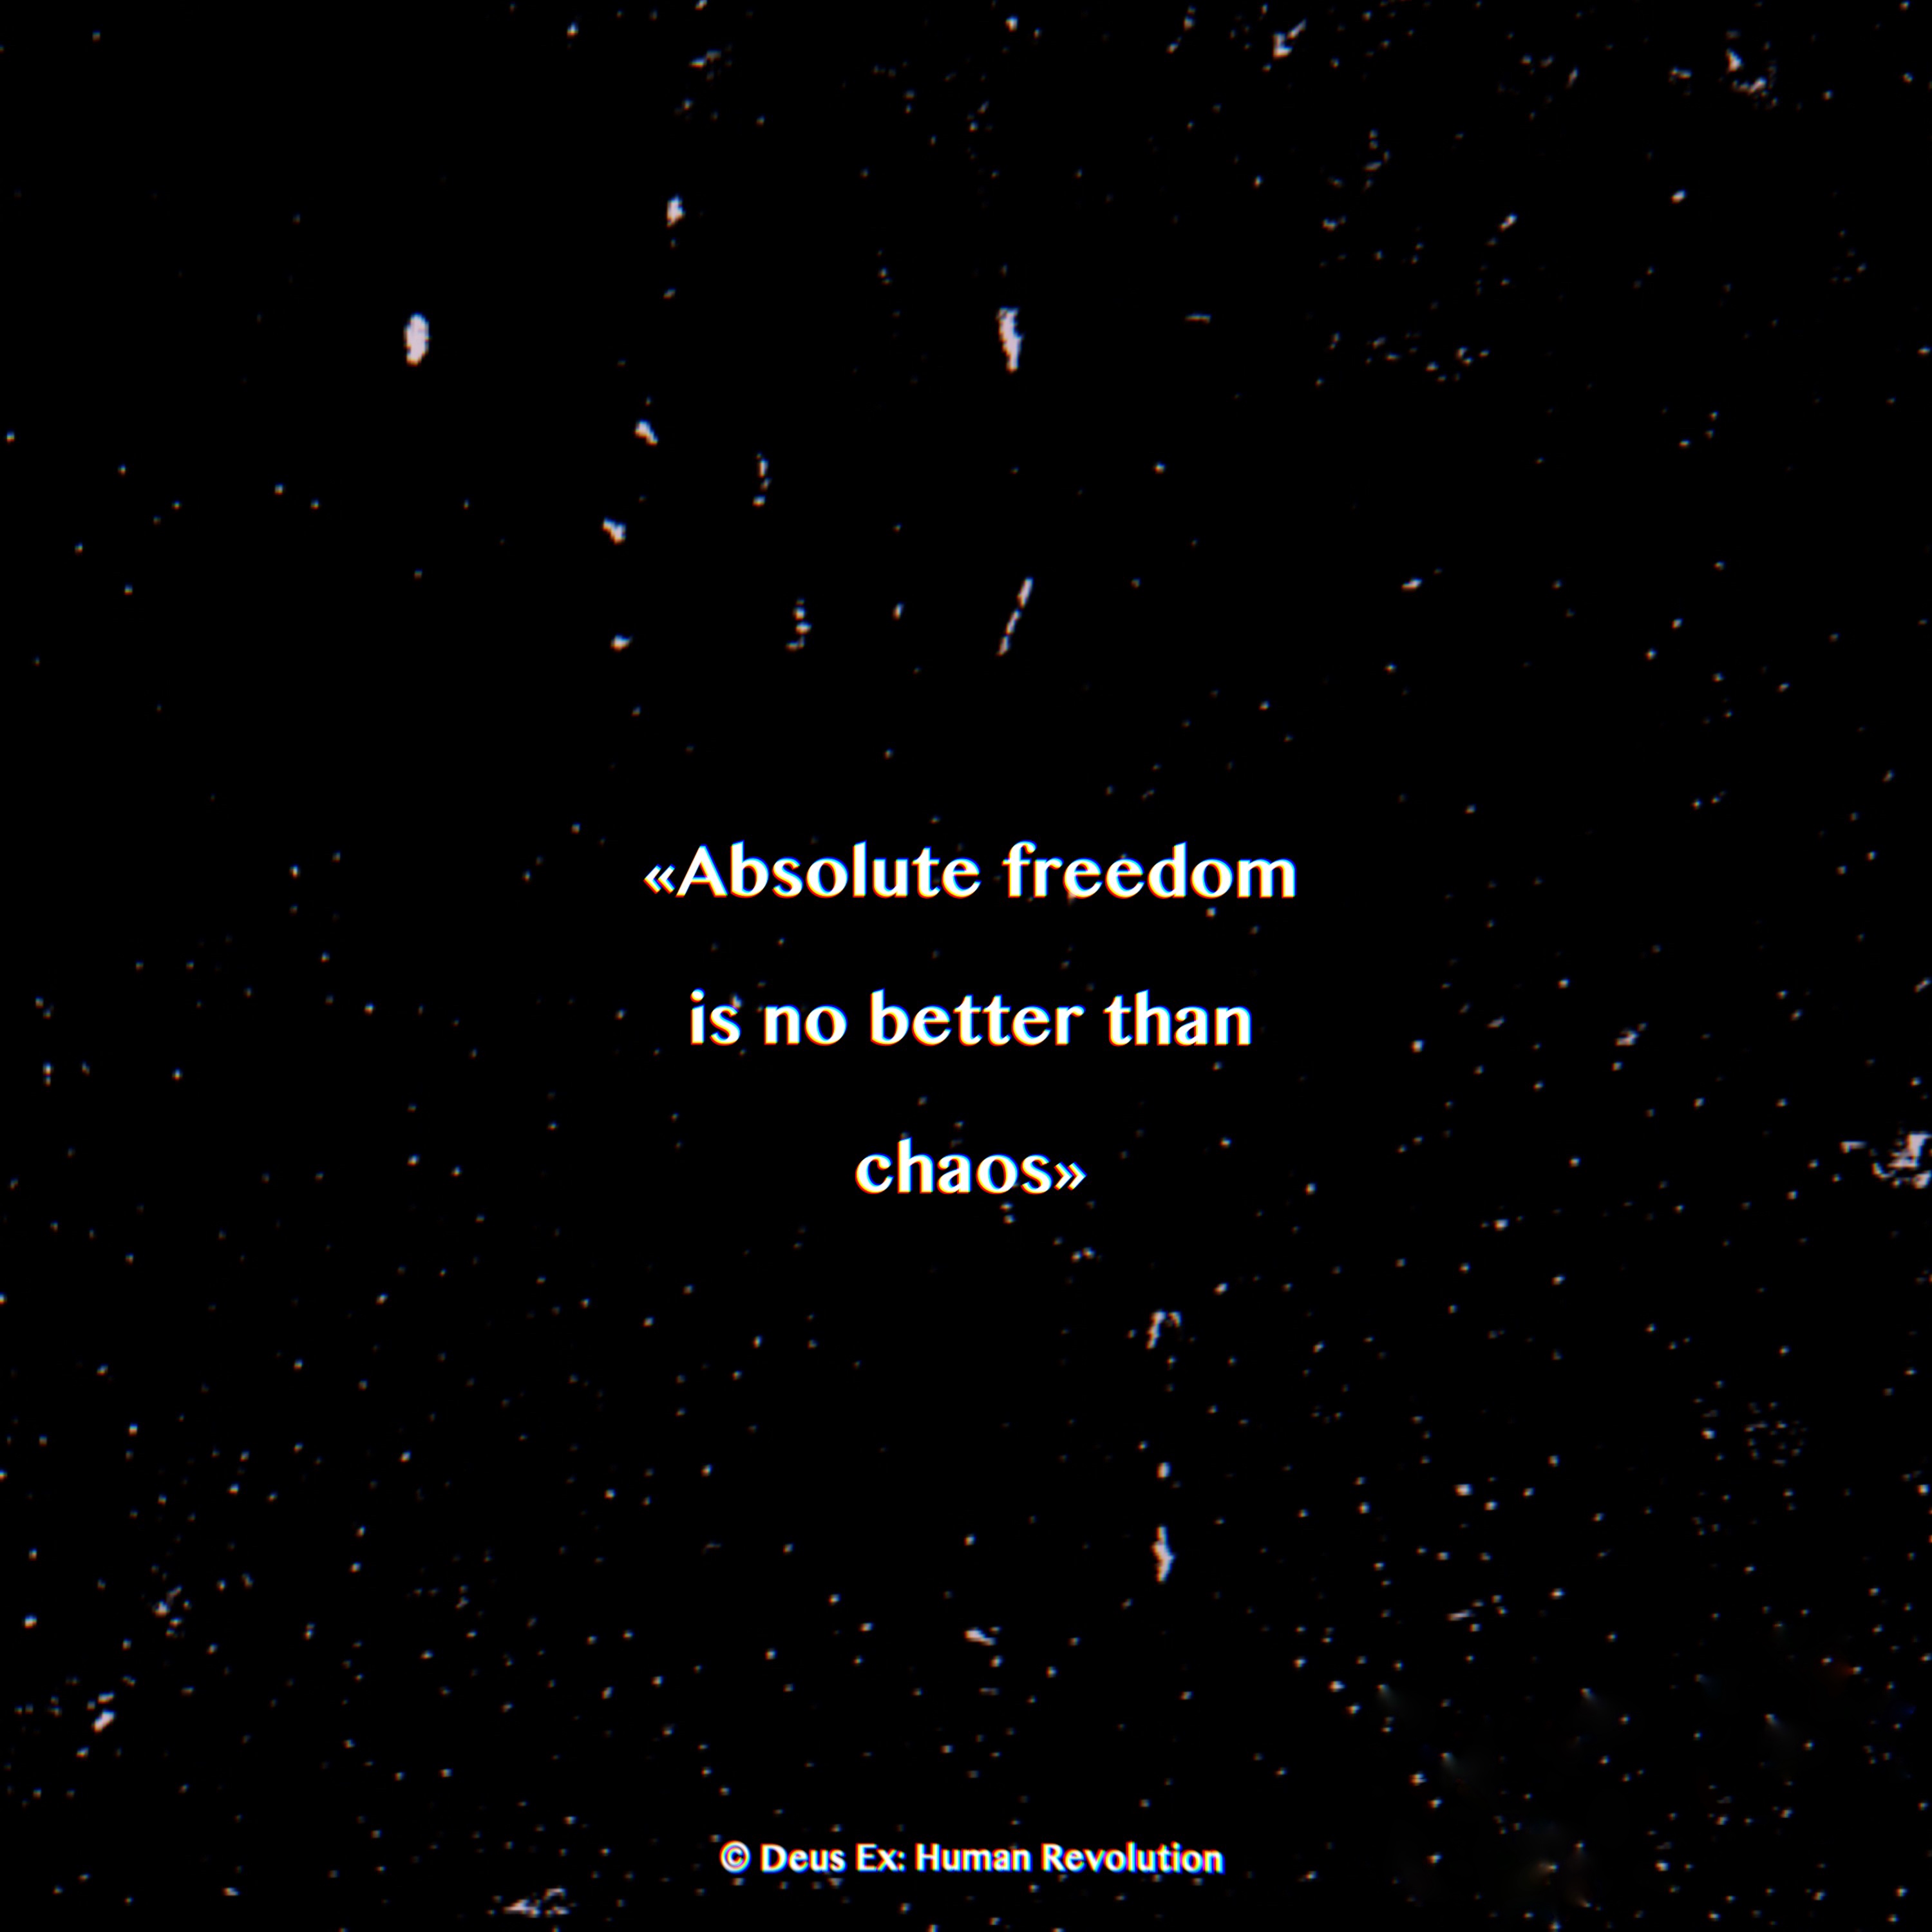 inscription, words, quote, text, freedom, quotation, chaos